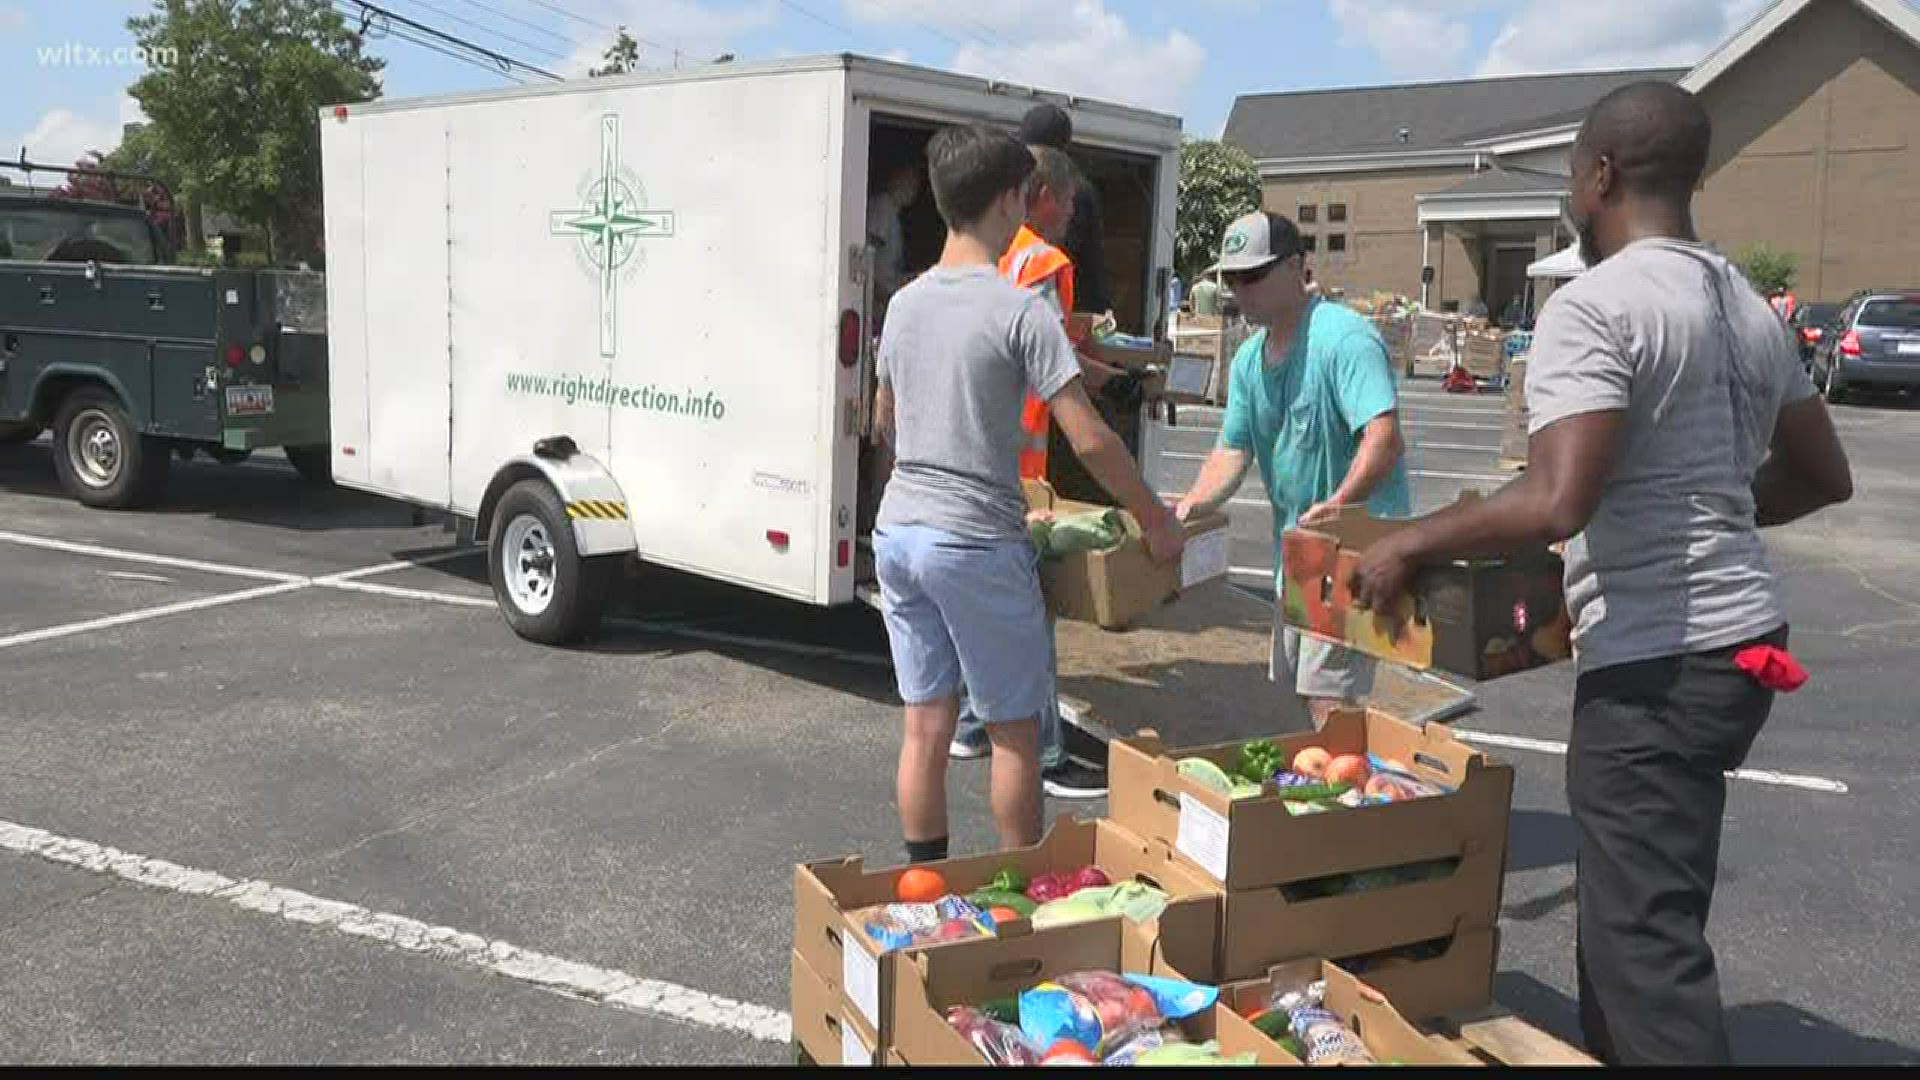 Each Thursday in July and August, people in the Midlands can receive a box of free fresh produce at Columbia First Nazarene.